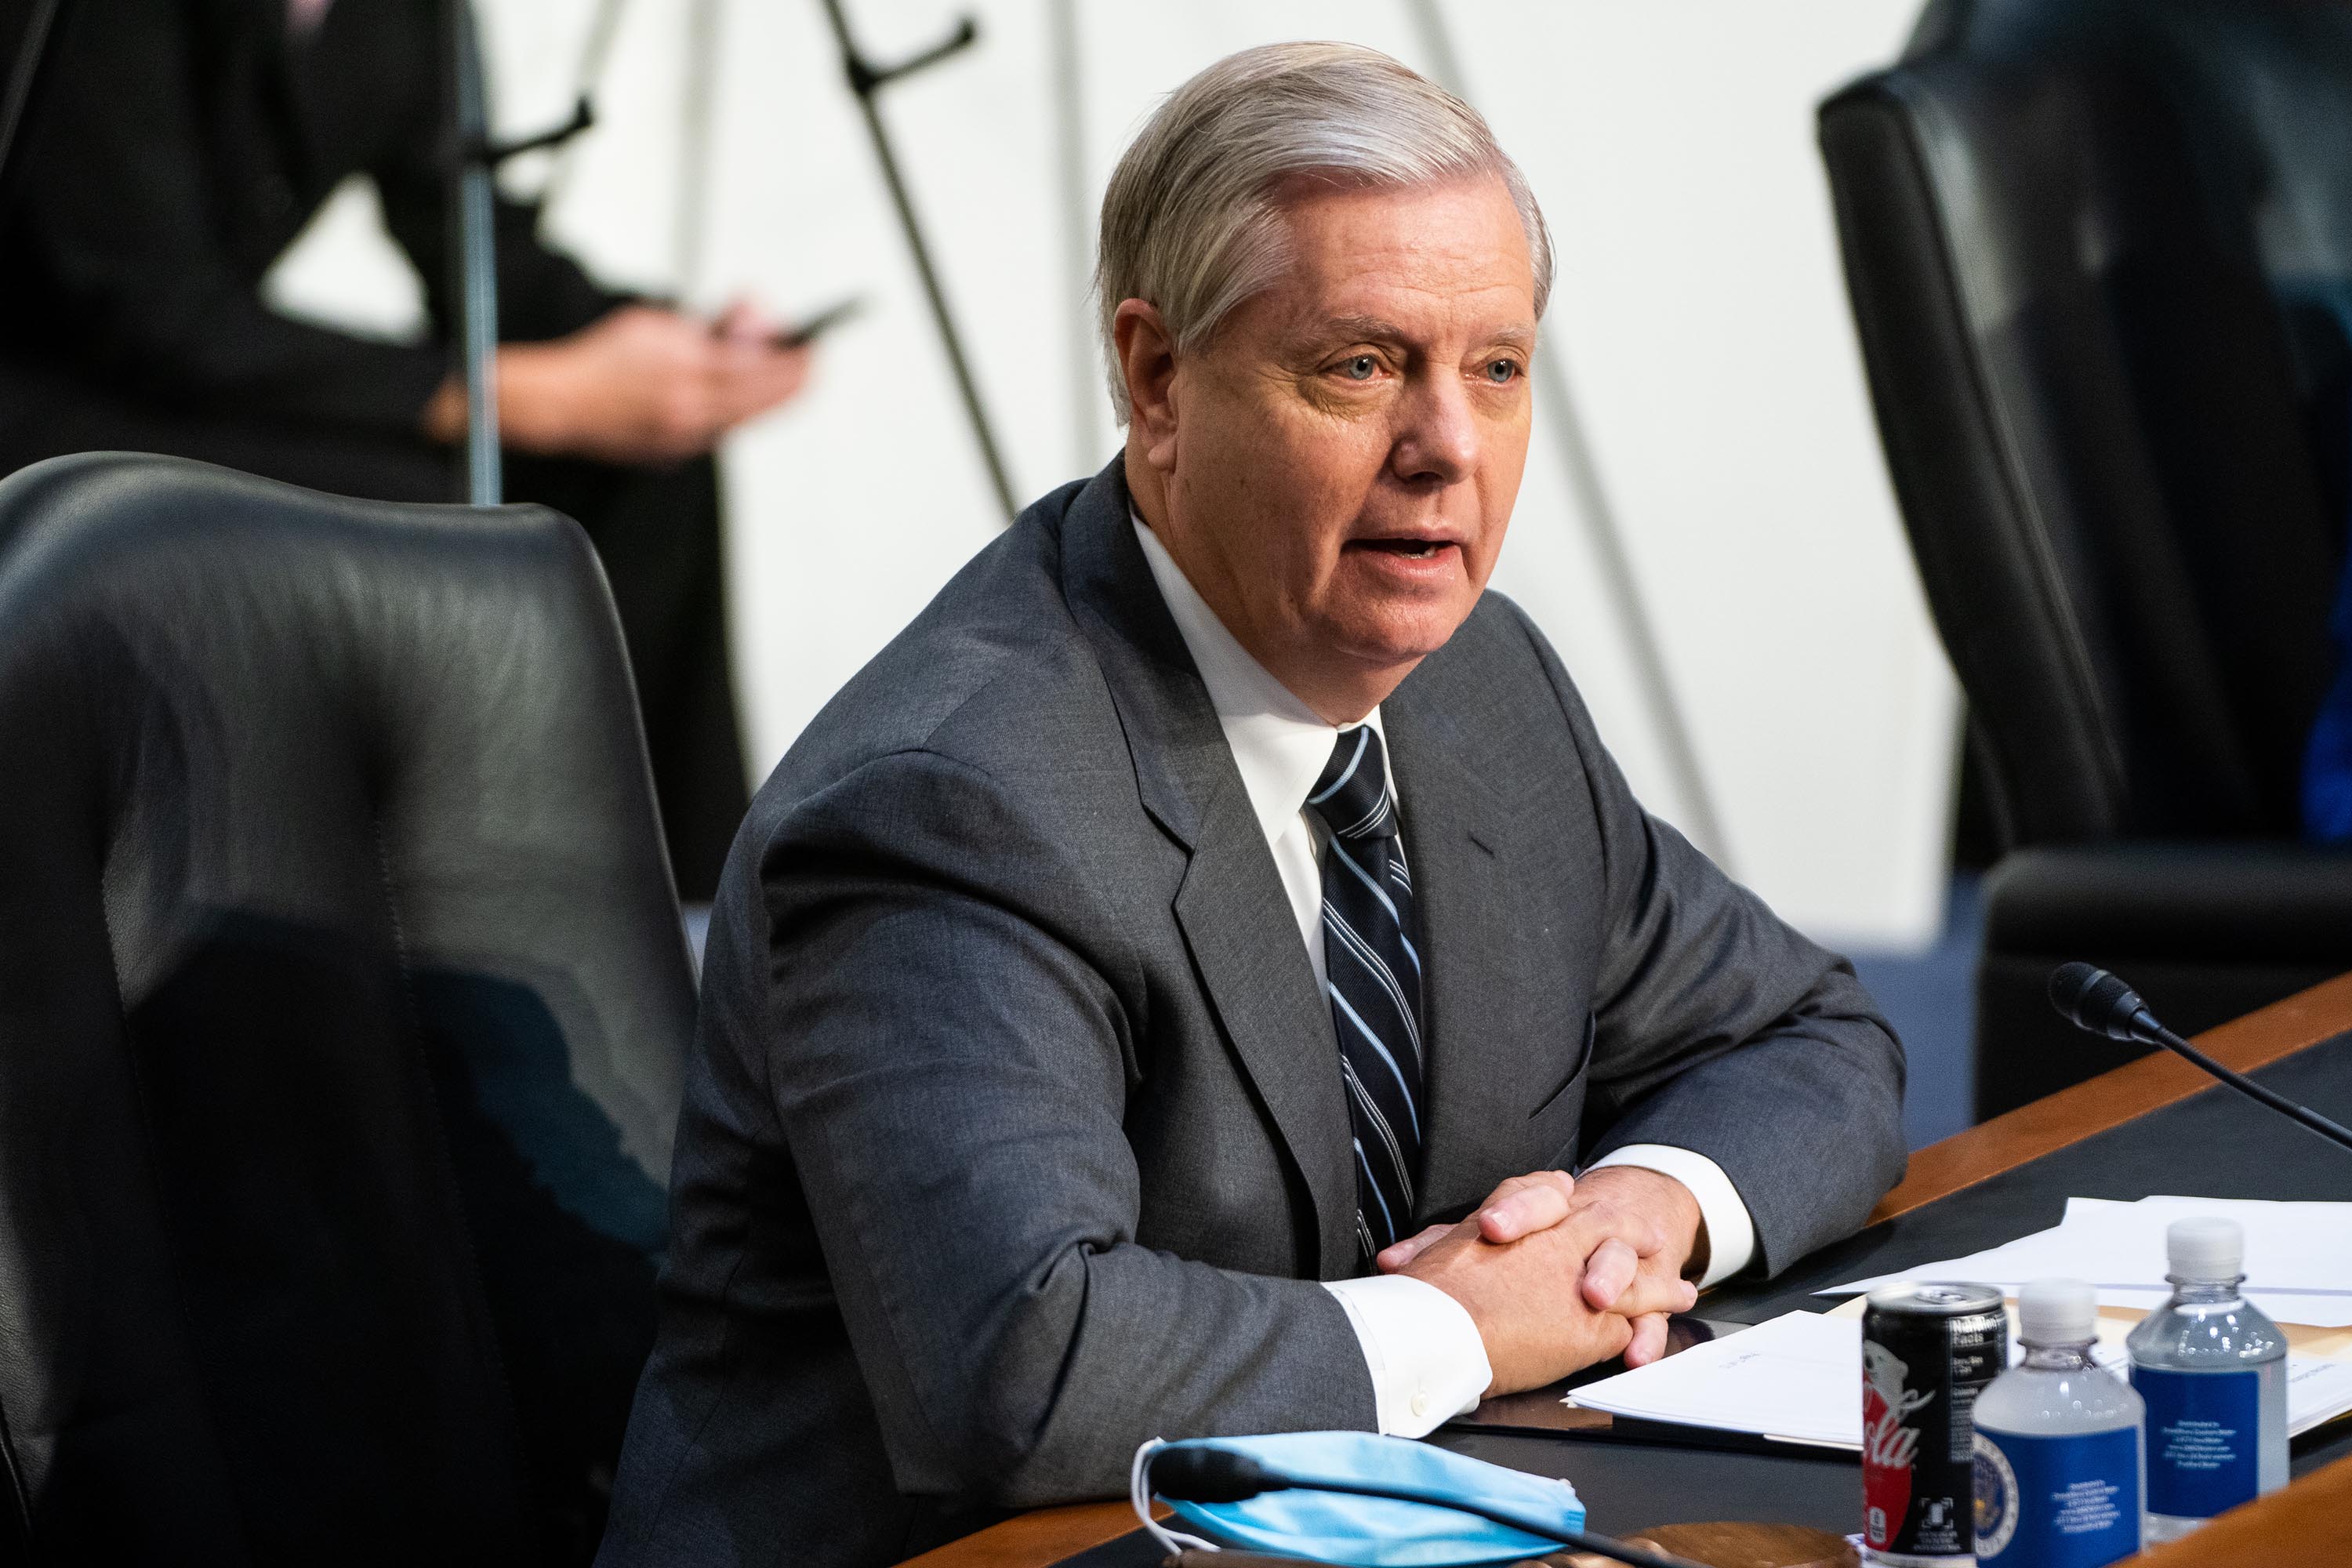 Lindsey Graham speaks during the Senate Judiciary Committee on the first day of Amy Coney Barrett’s Supreme Court confirmation hearing on Capitol Hill on October 12.